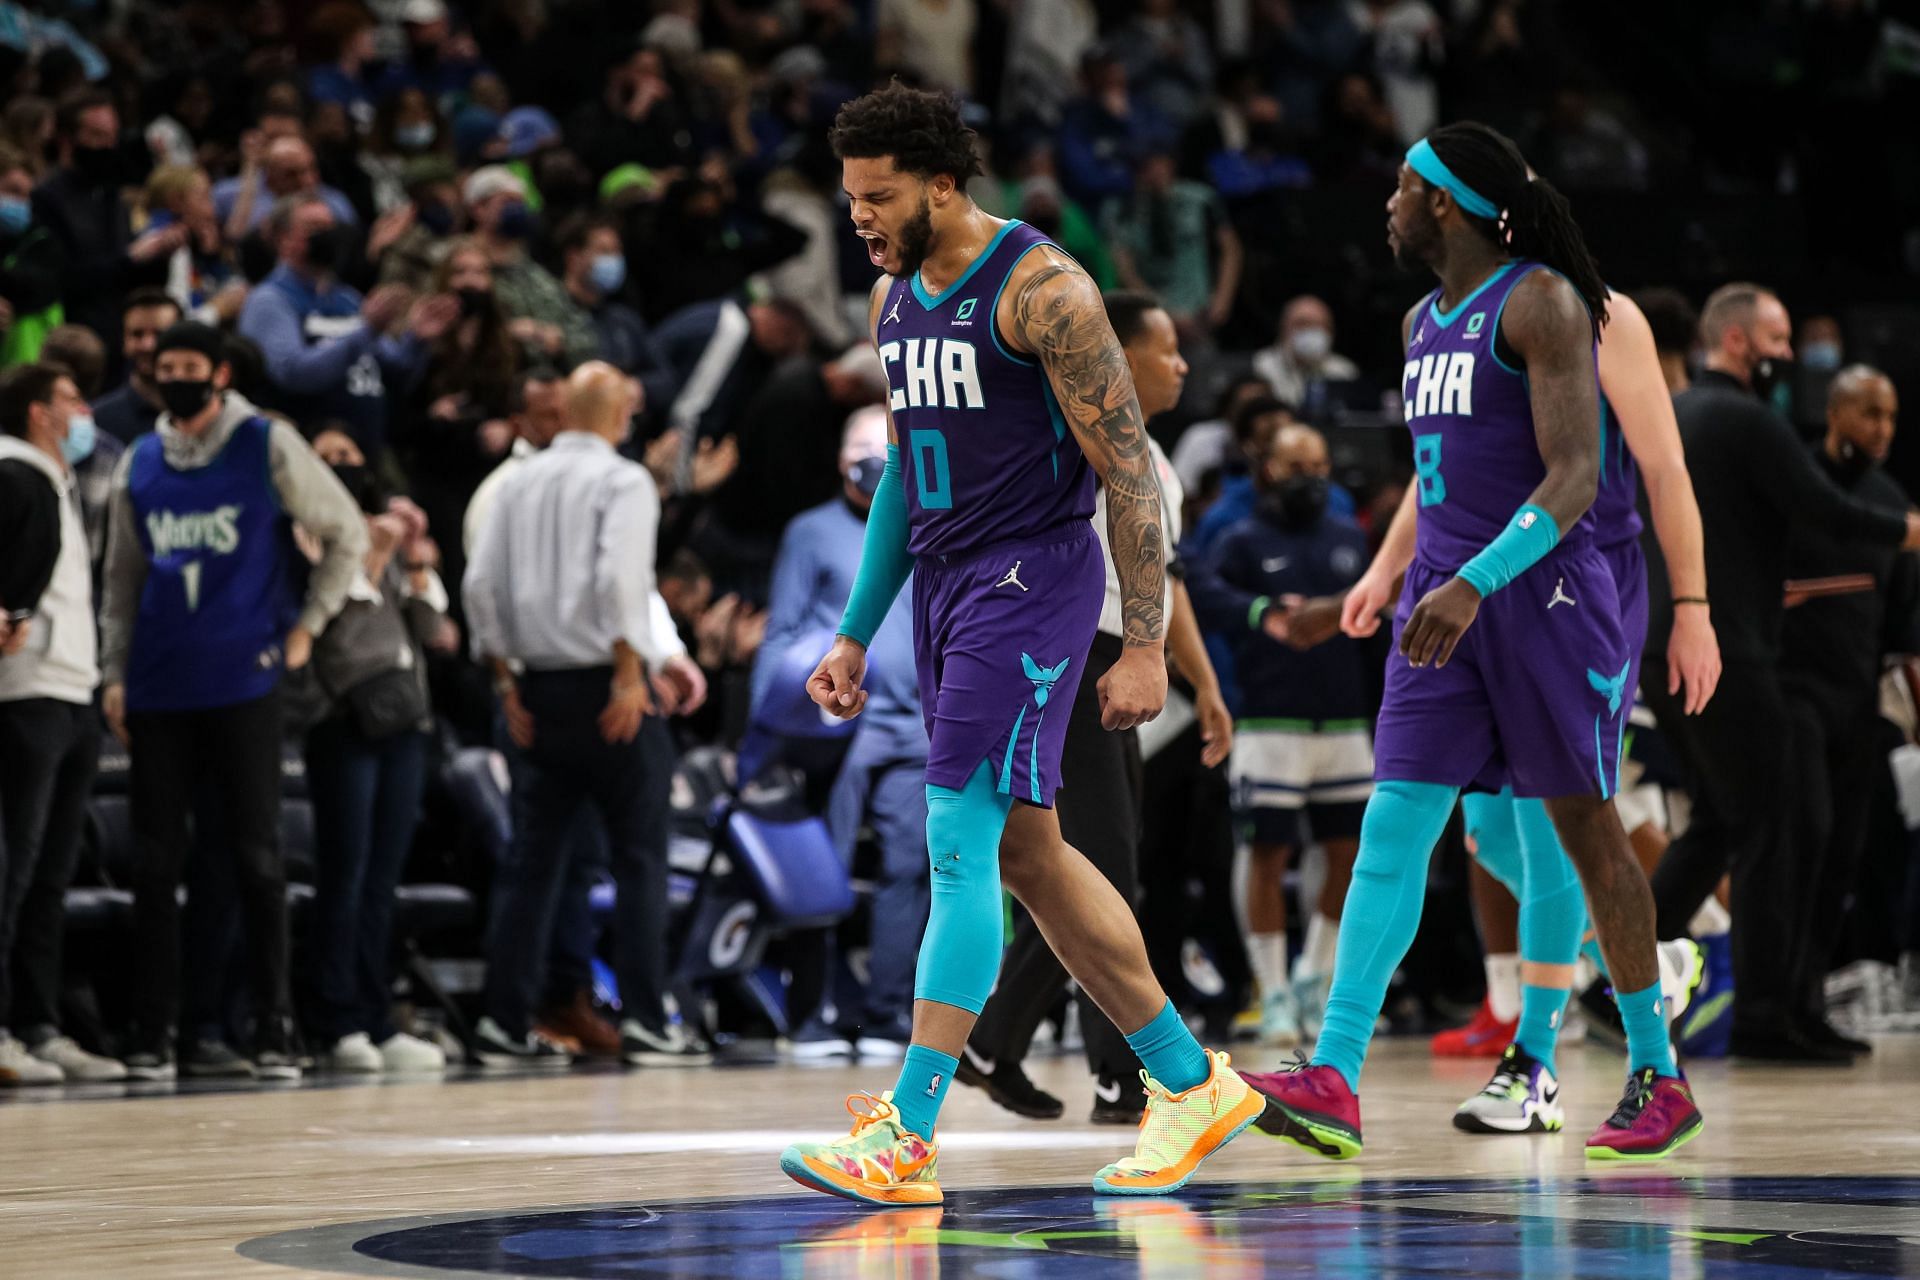 Miles Bridges of the Charlotte Hornets reacts during the game against the Minnesota Timberwolves.